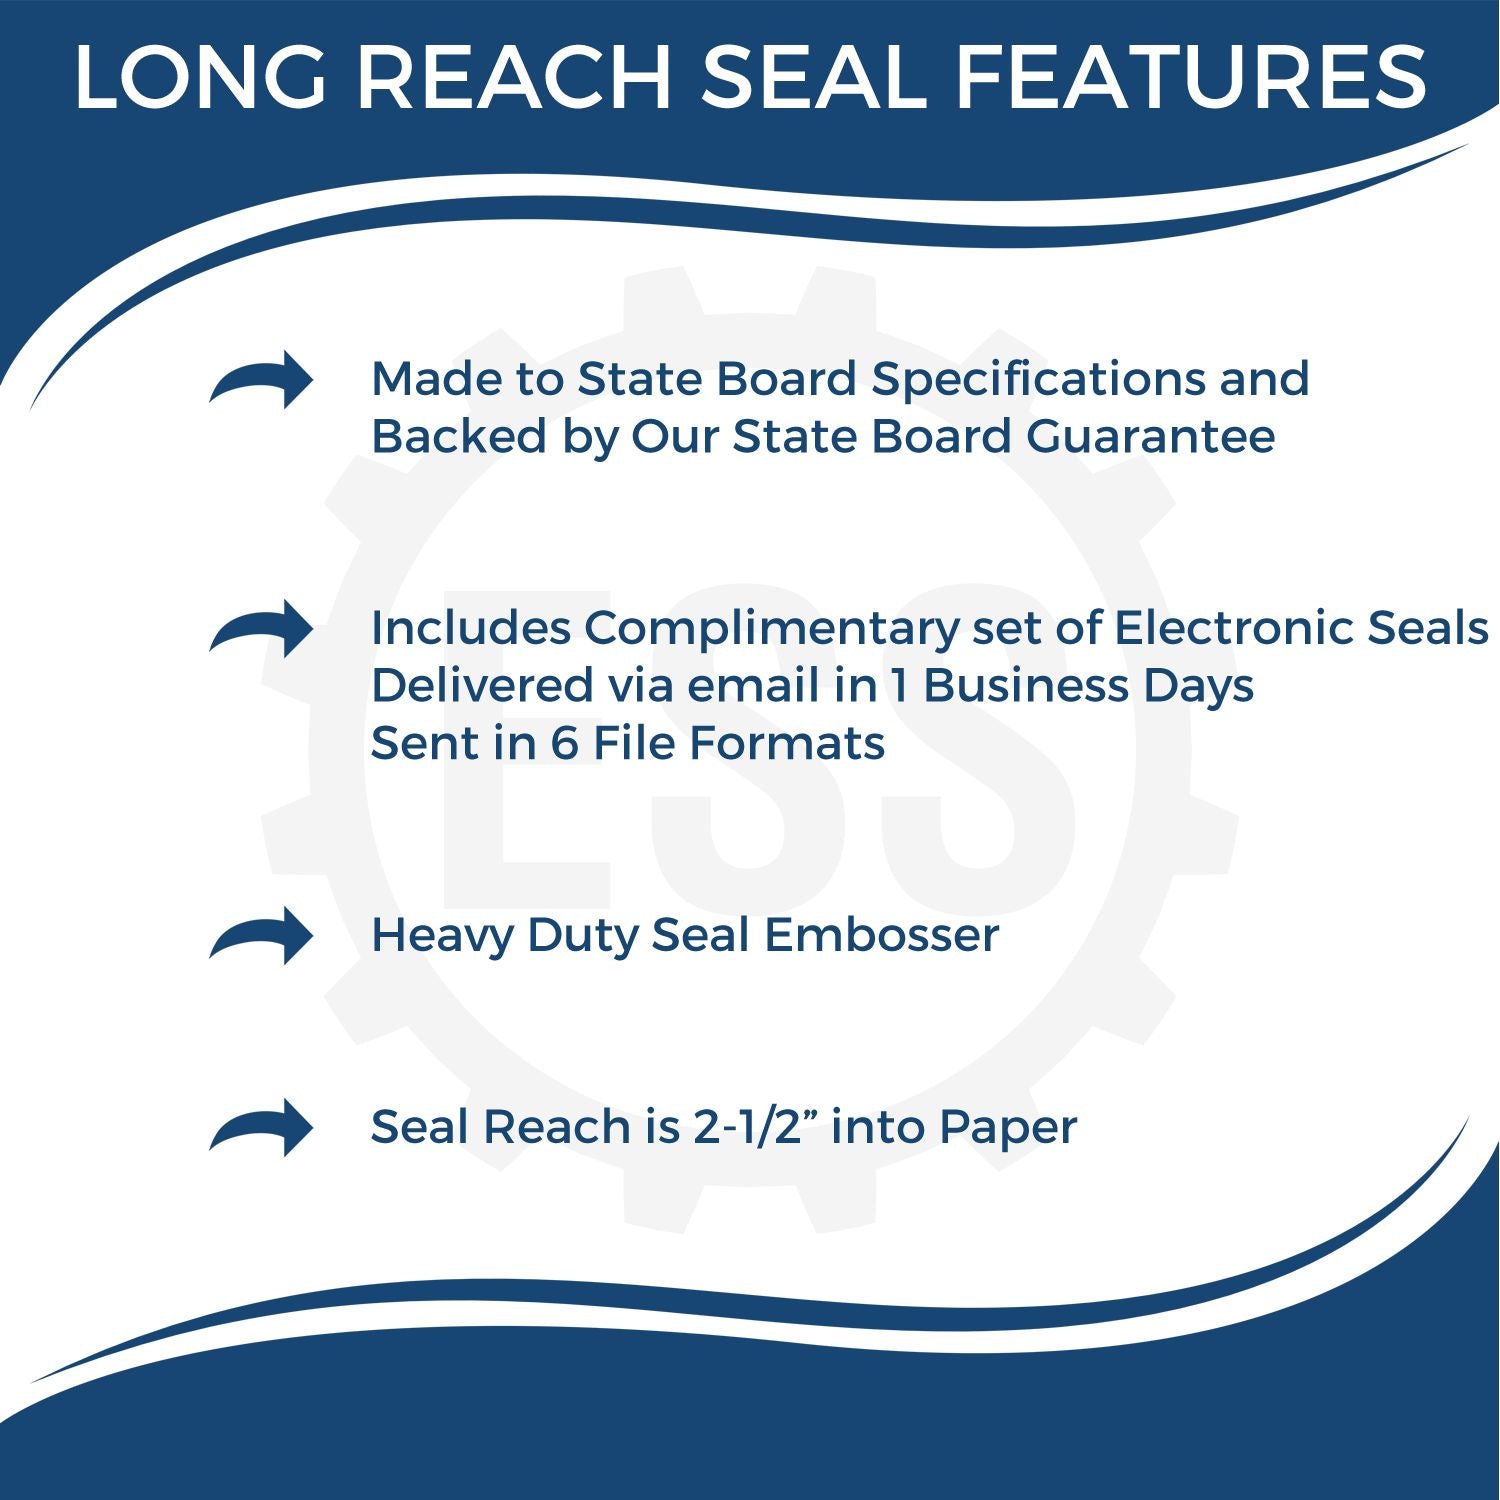 The main image for the Long Reach Illinois PE Seal depicting a sample of the imprint and electronic files